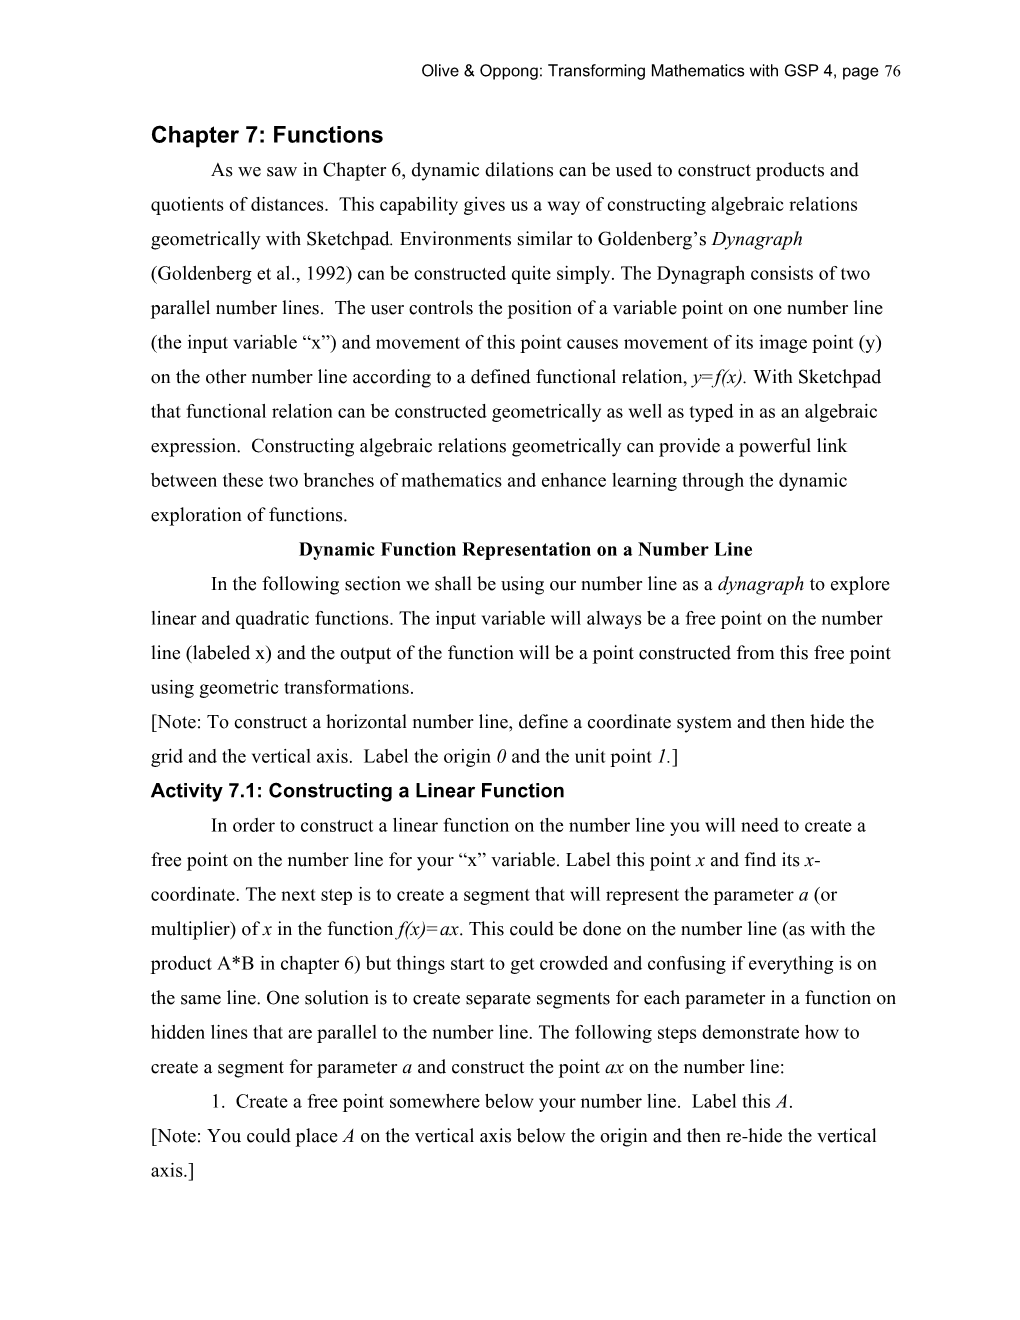 Olive & Oppong: Transforming Mathematics with GSP 4, Page 1